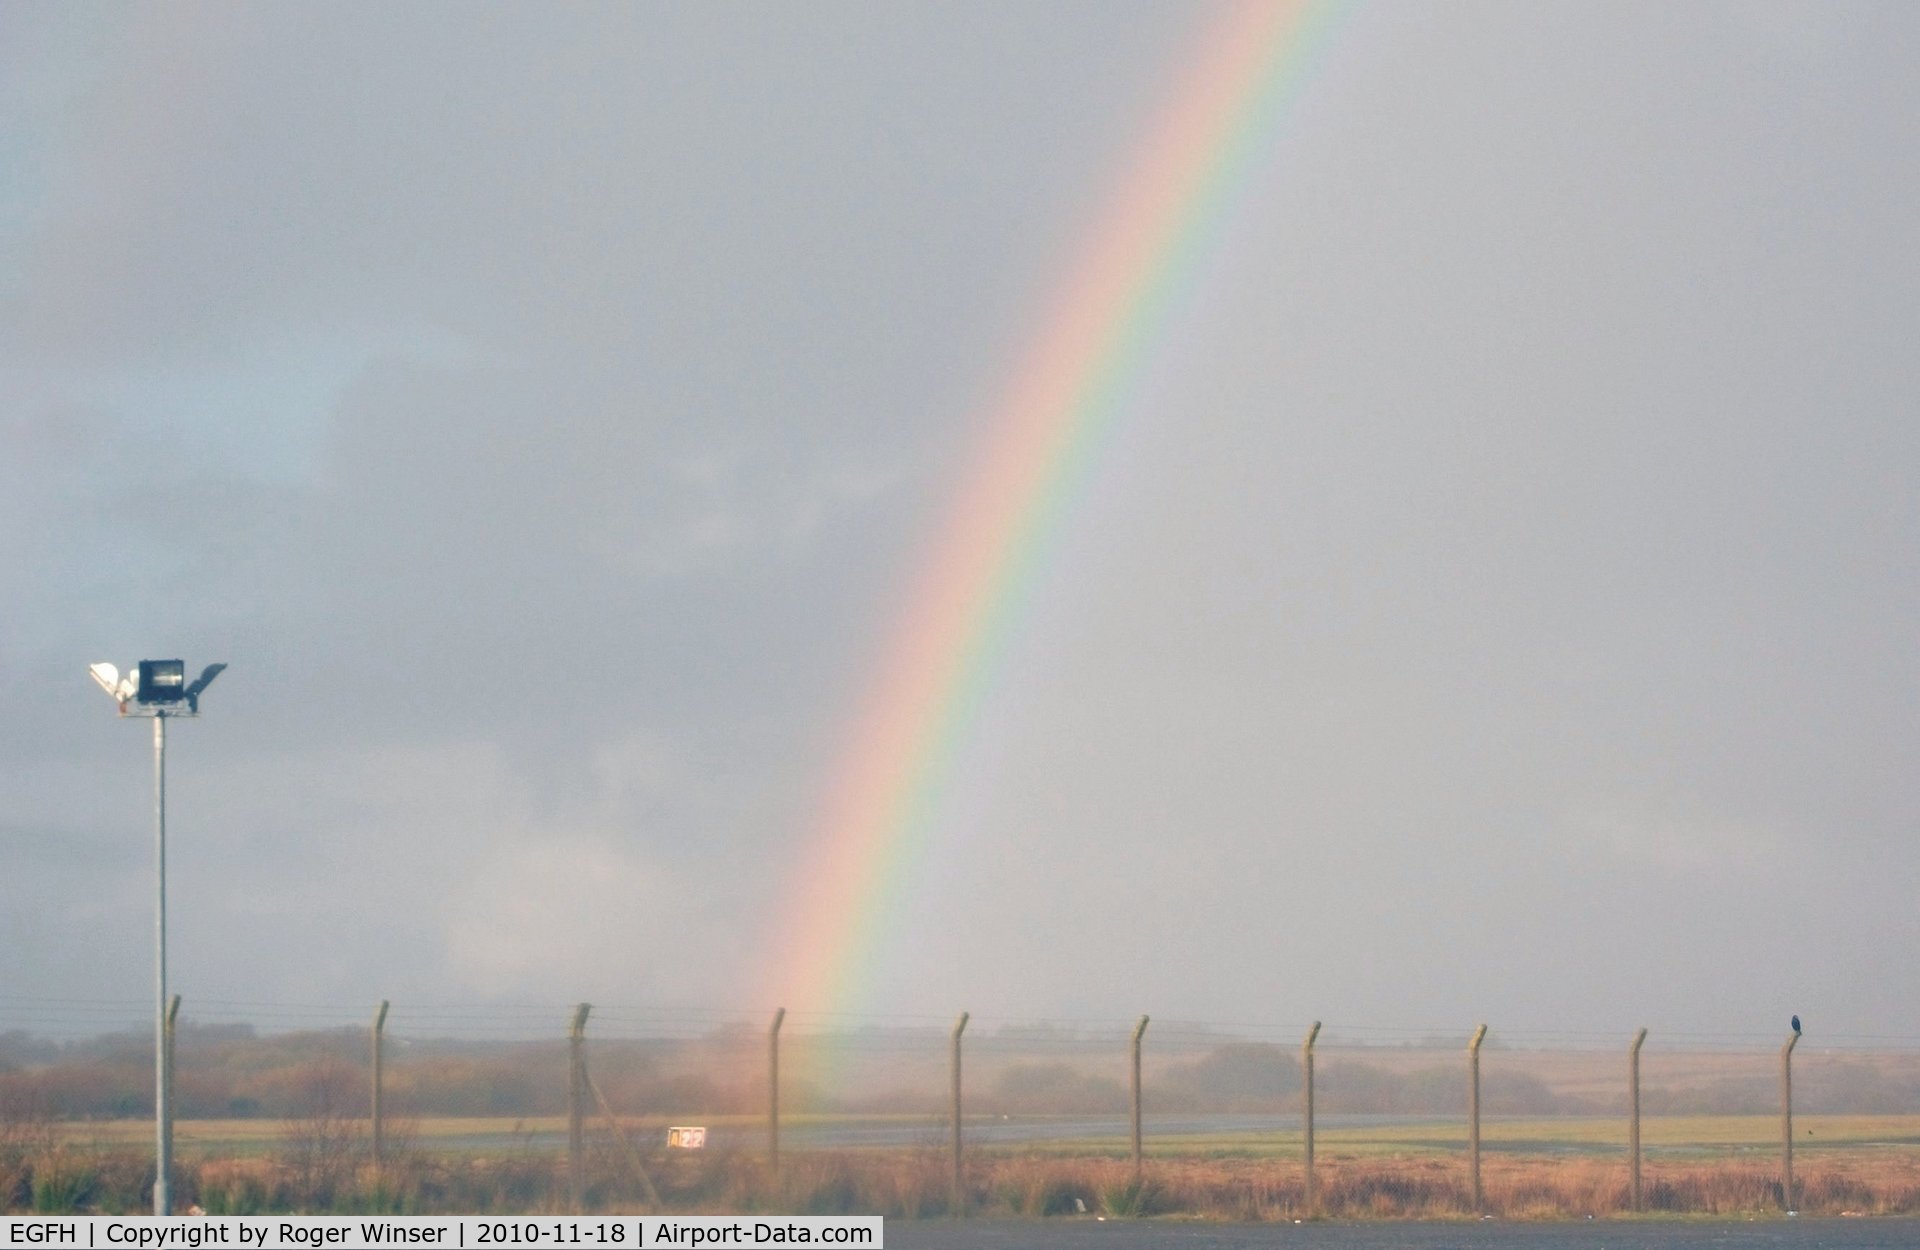 Swansea Airport, Swansea, Wales United Kingdom (EGFH) - After the storm. Looking to the north